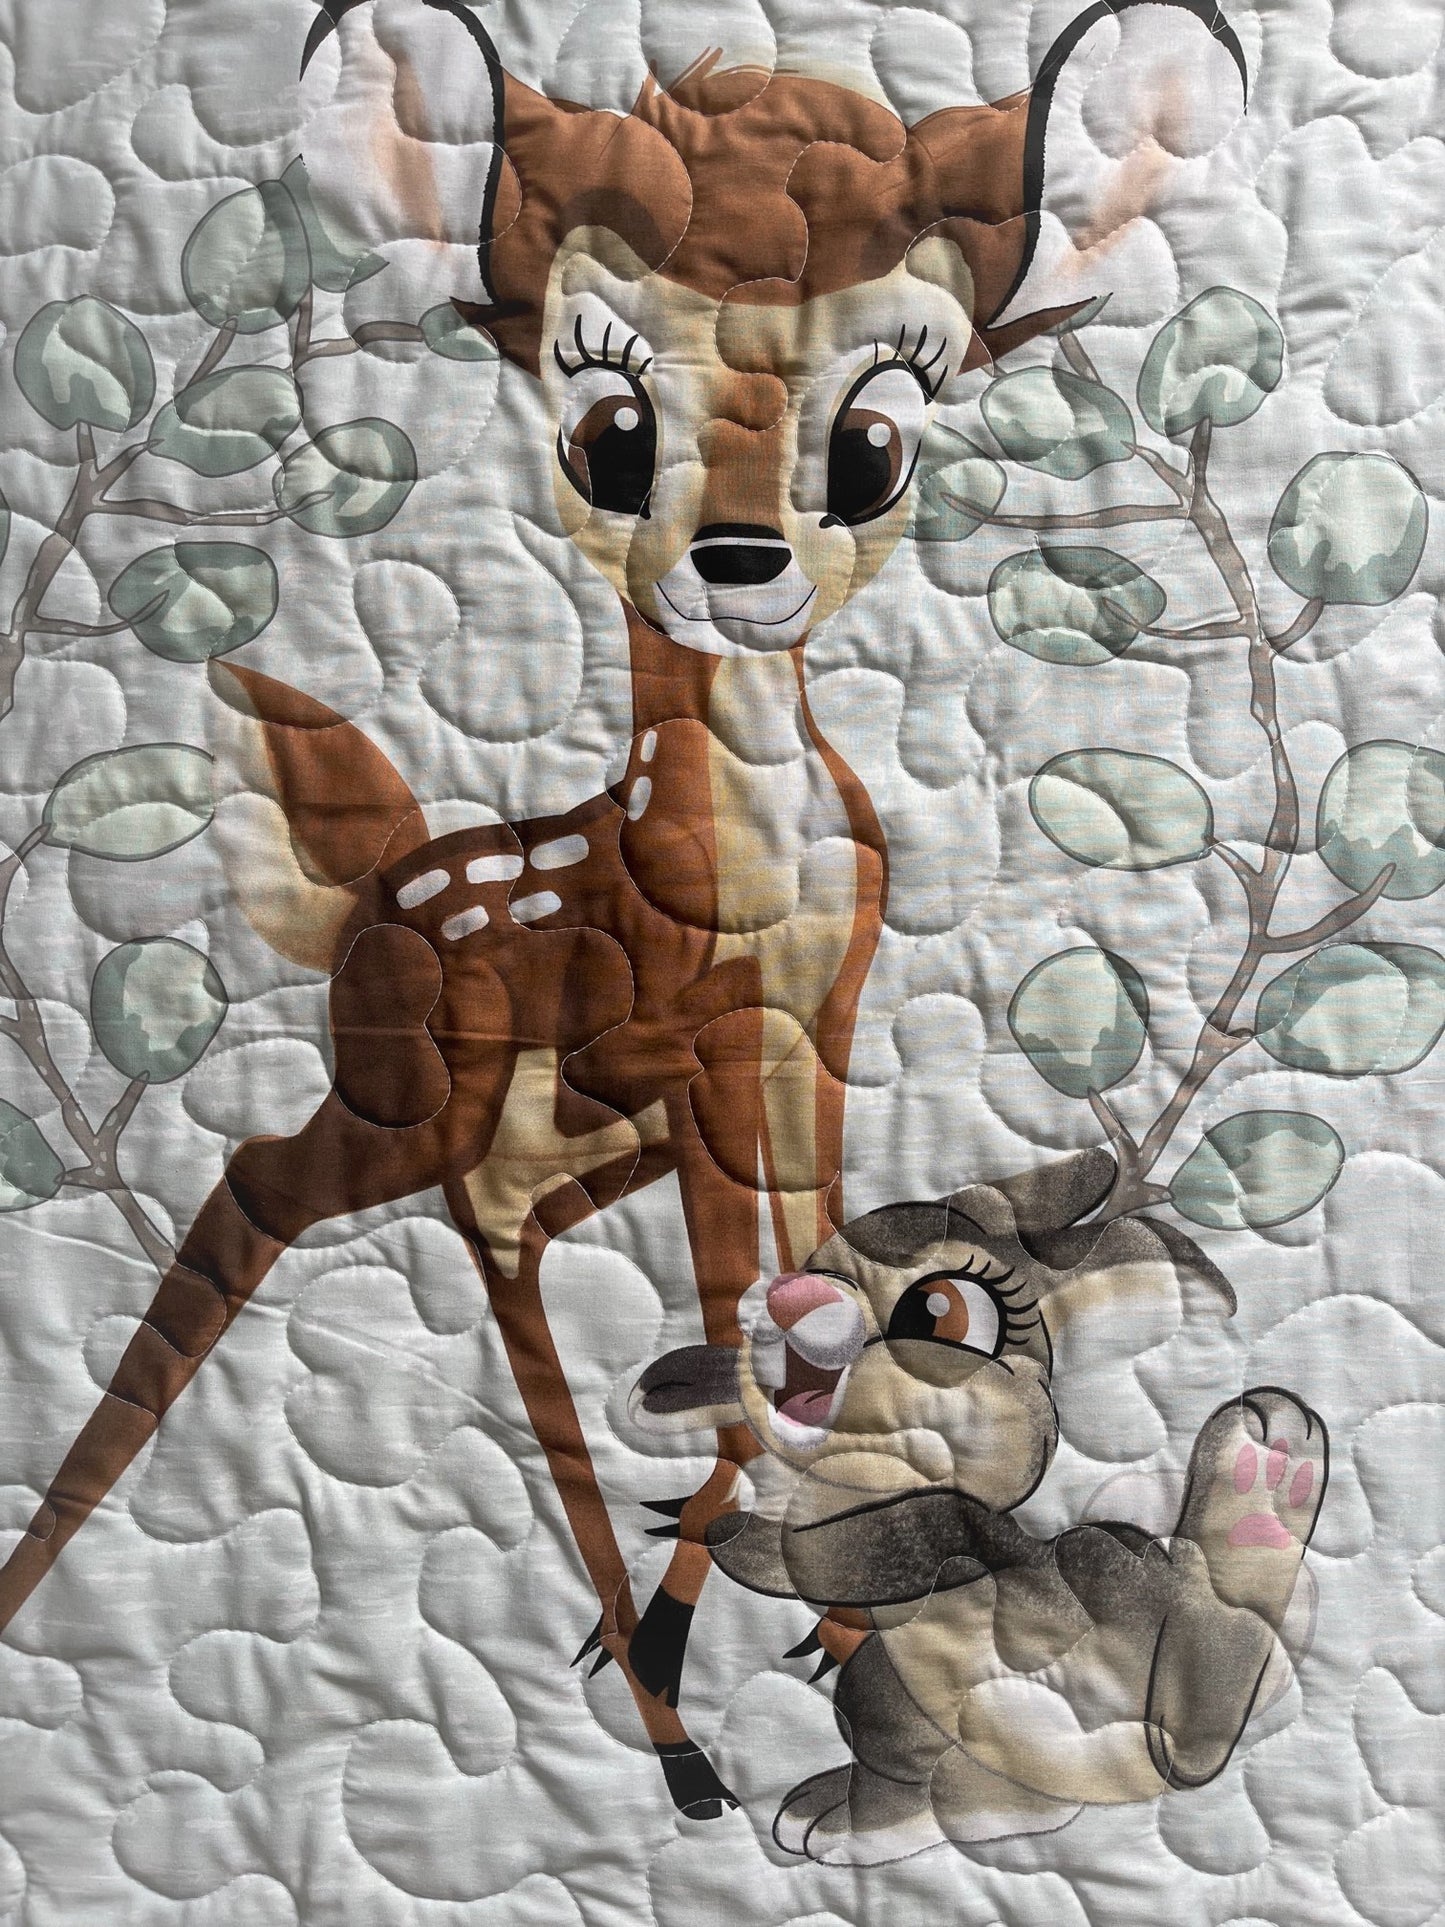 BAMBI THUMPER Inspired Quilted Blanket 36"X44" Bambi nursery to adult lap blanket